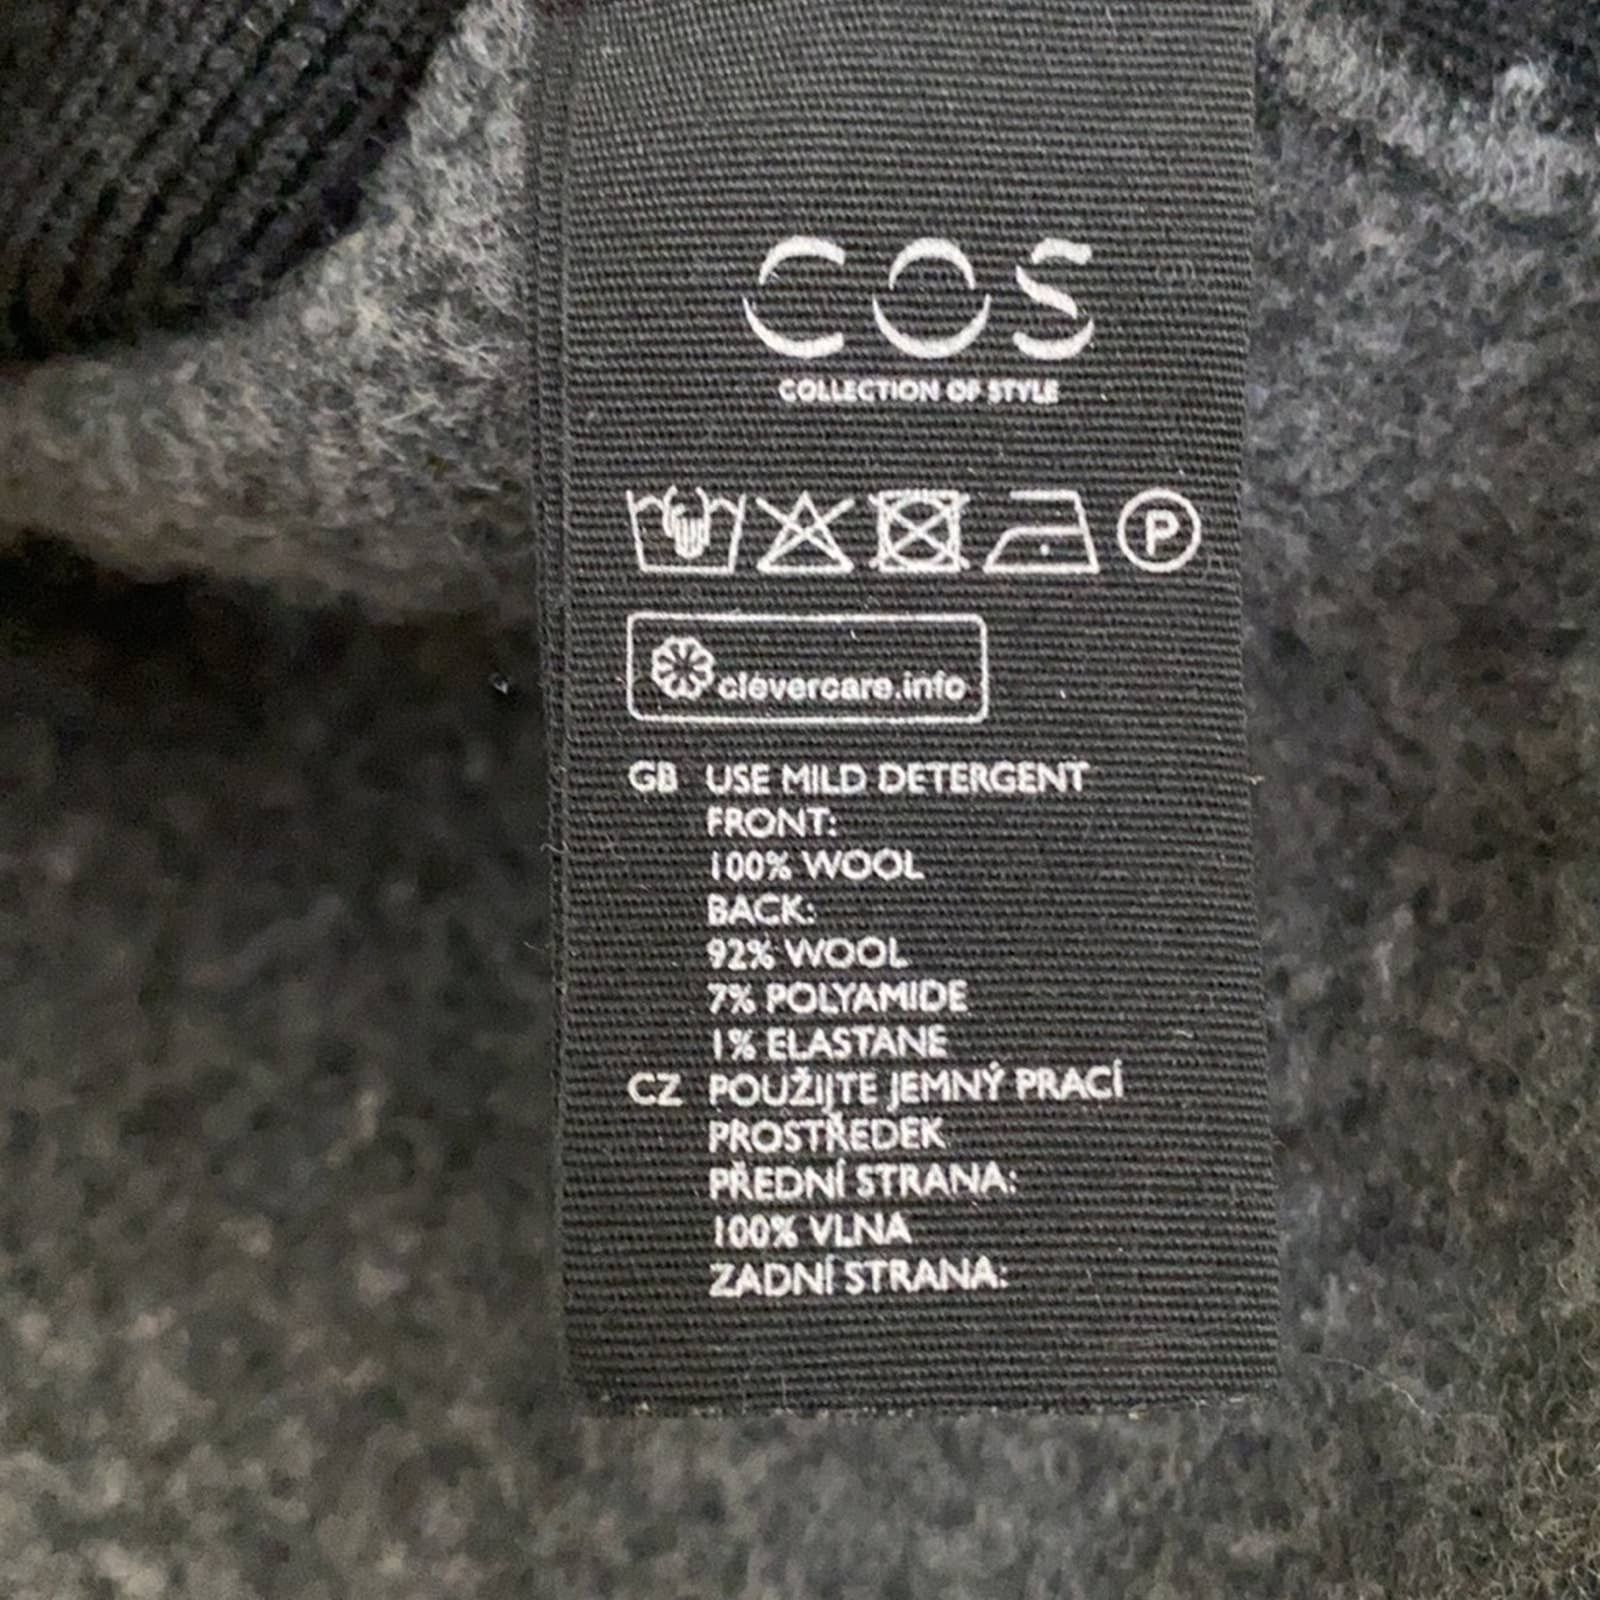 Cos COS Two Tone Wool Blend Sweater Size S / US 4 / IT 40 - 4 Preview